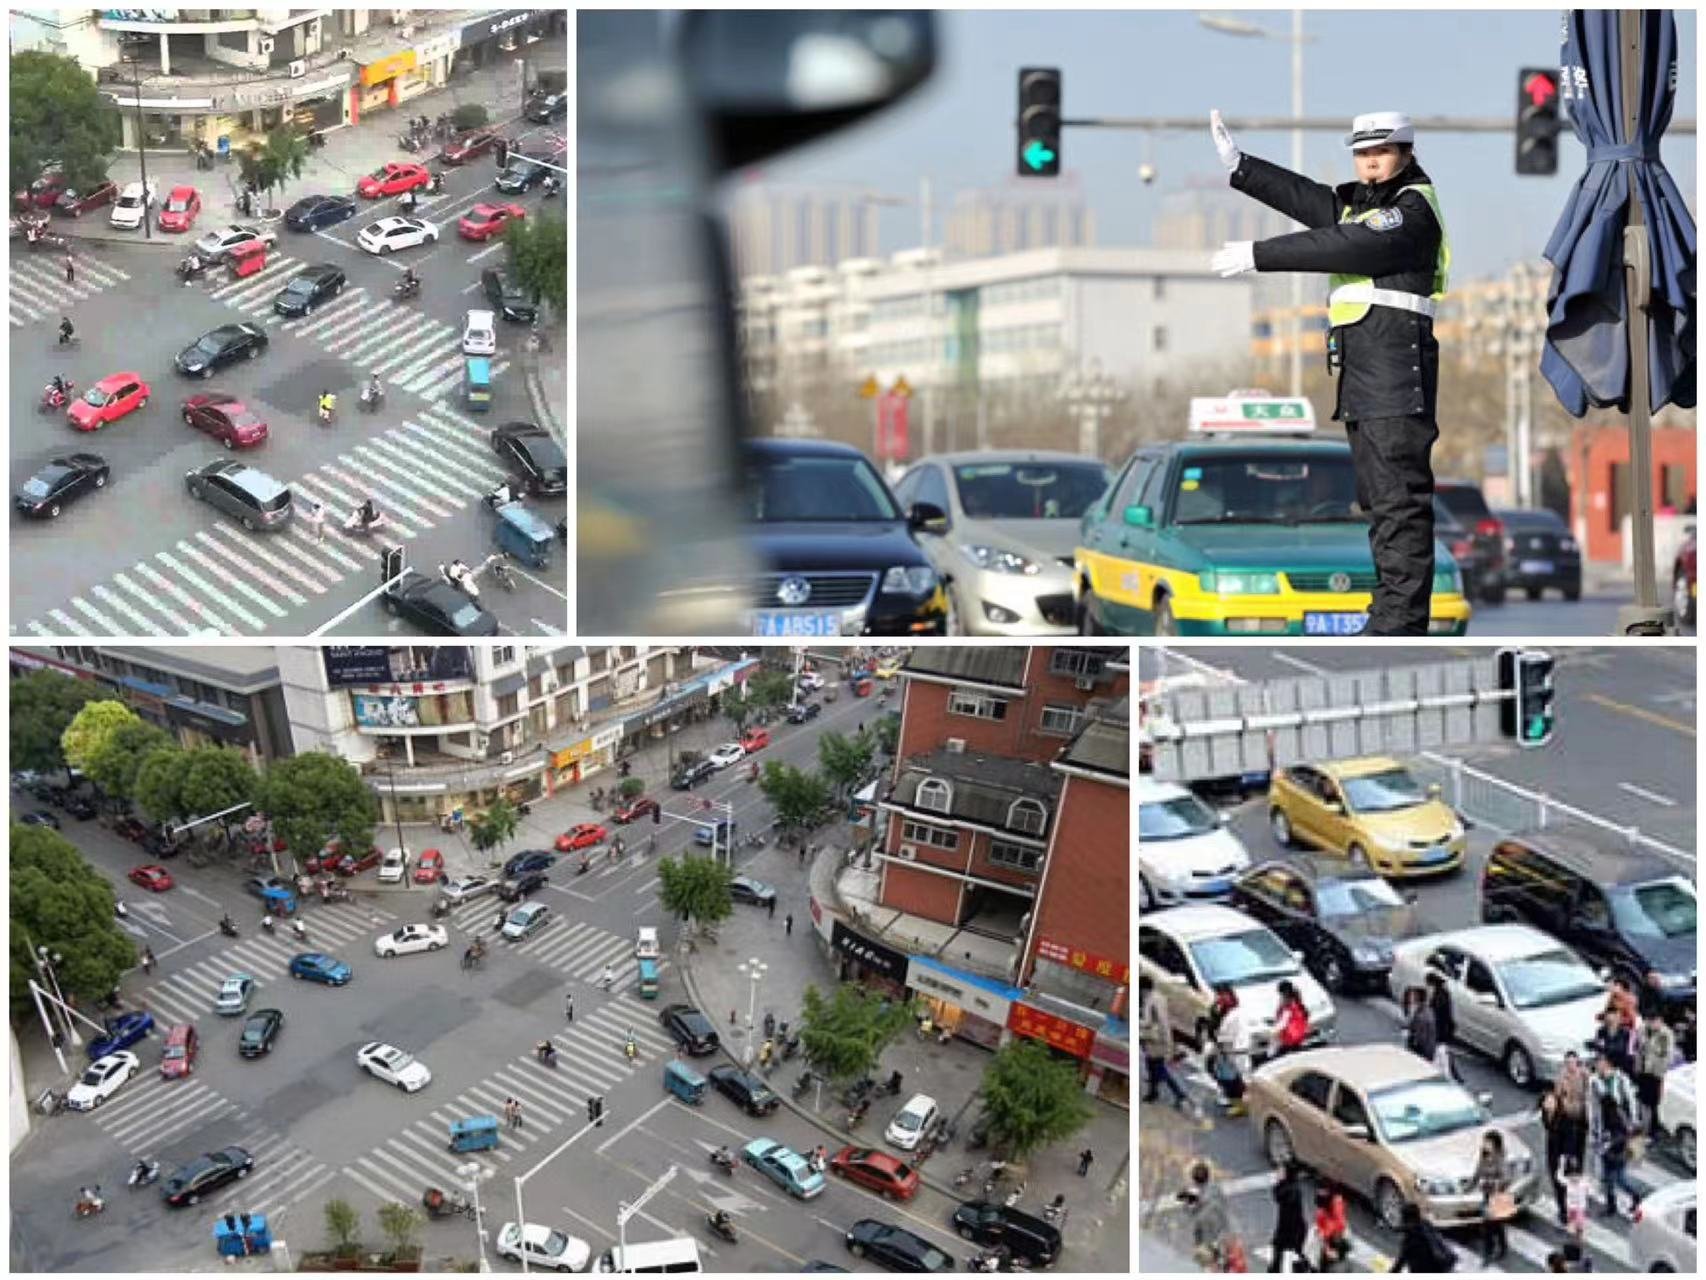 The thing Kim YoungAh would miss the least if he left China: The traffic rules.